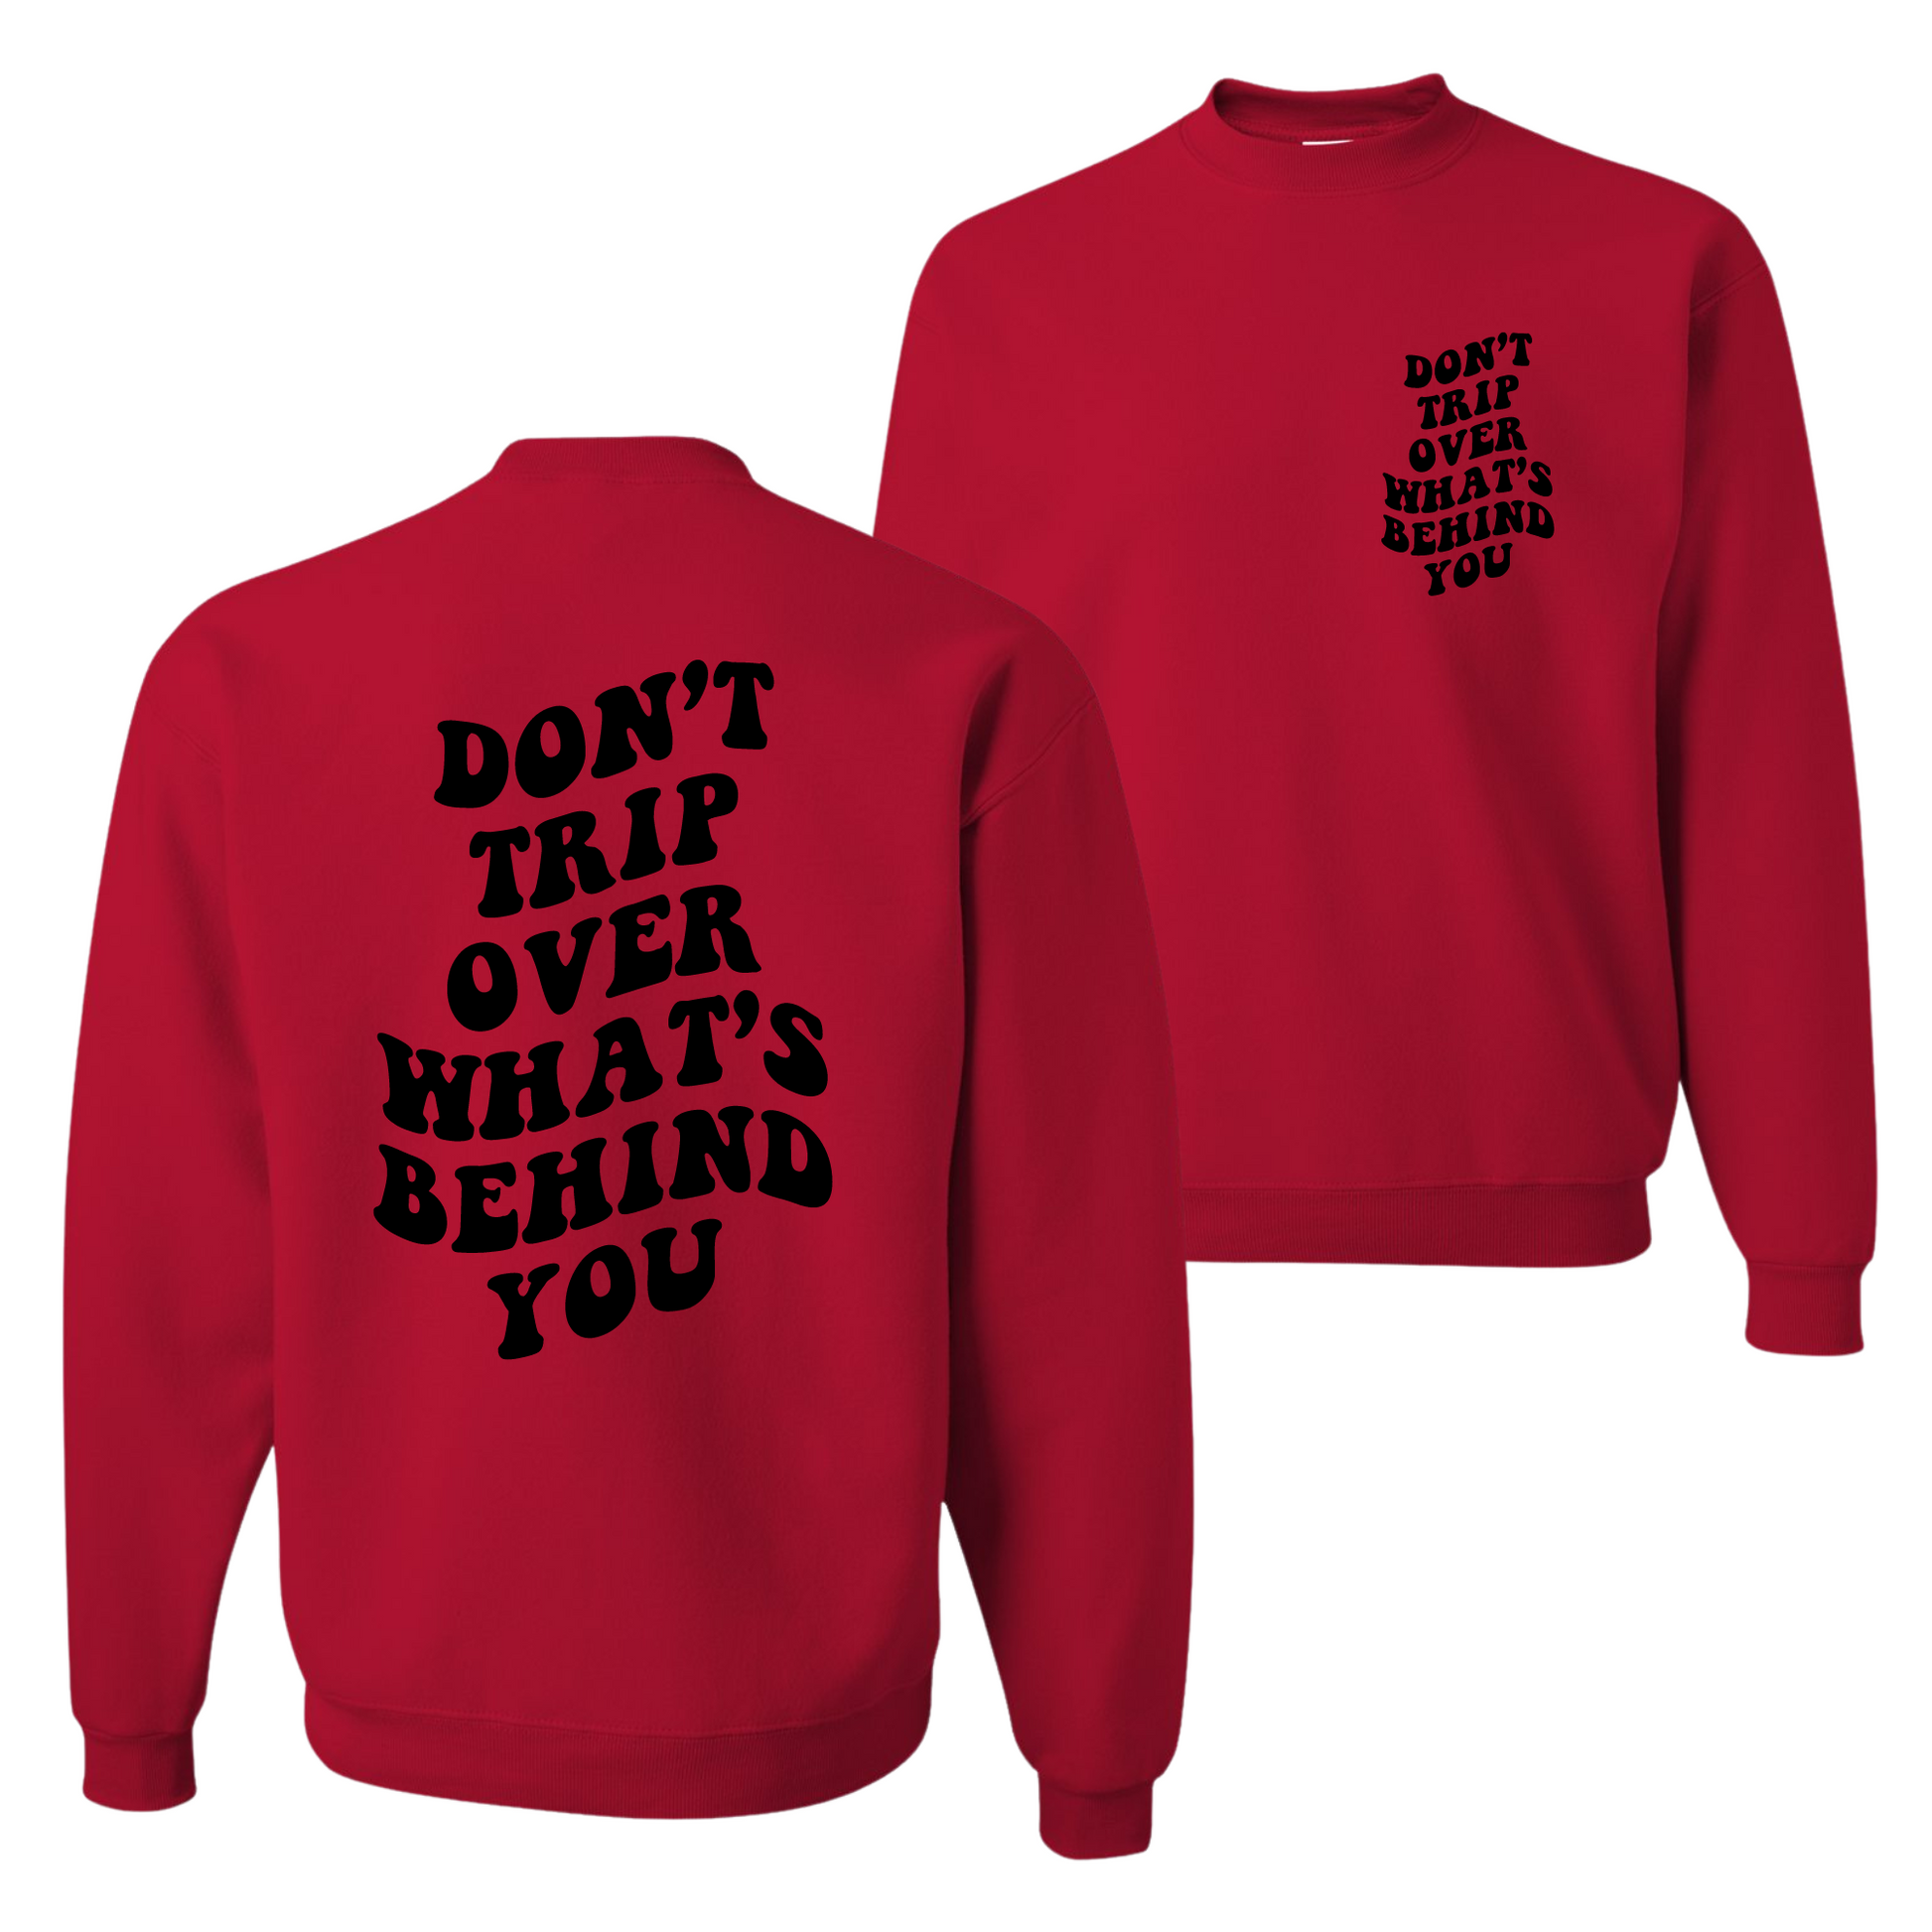 Resiliently Bold Don't Trip Over What's Behind You Red Unisex Crewneck Sweatshirt